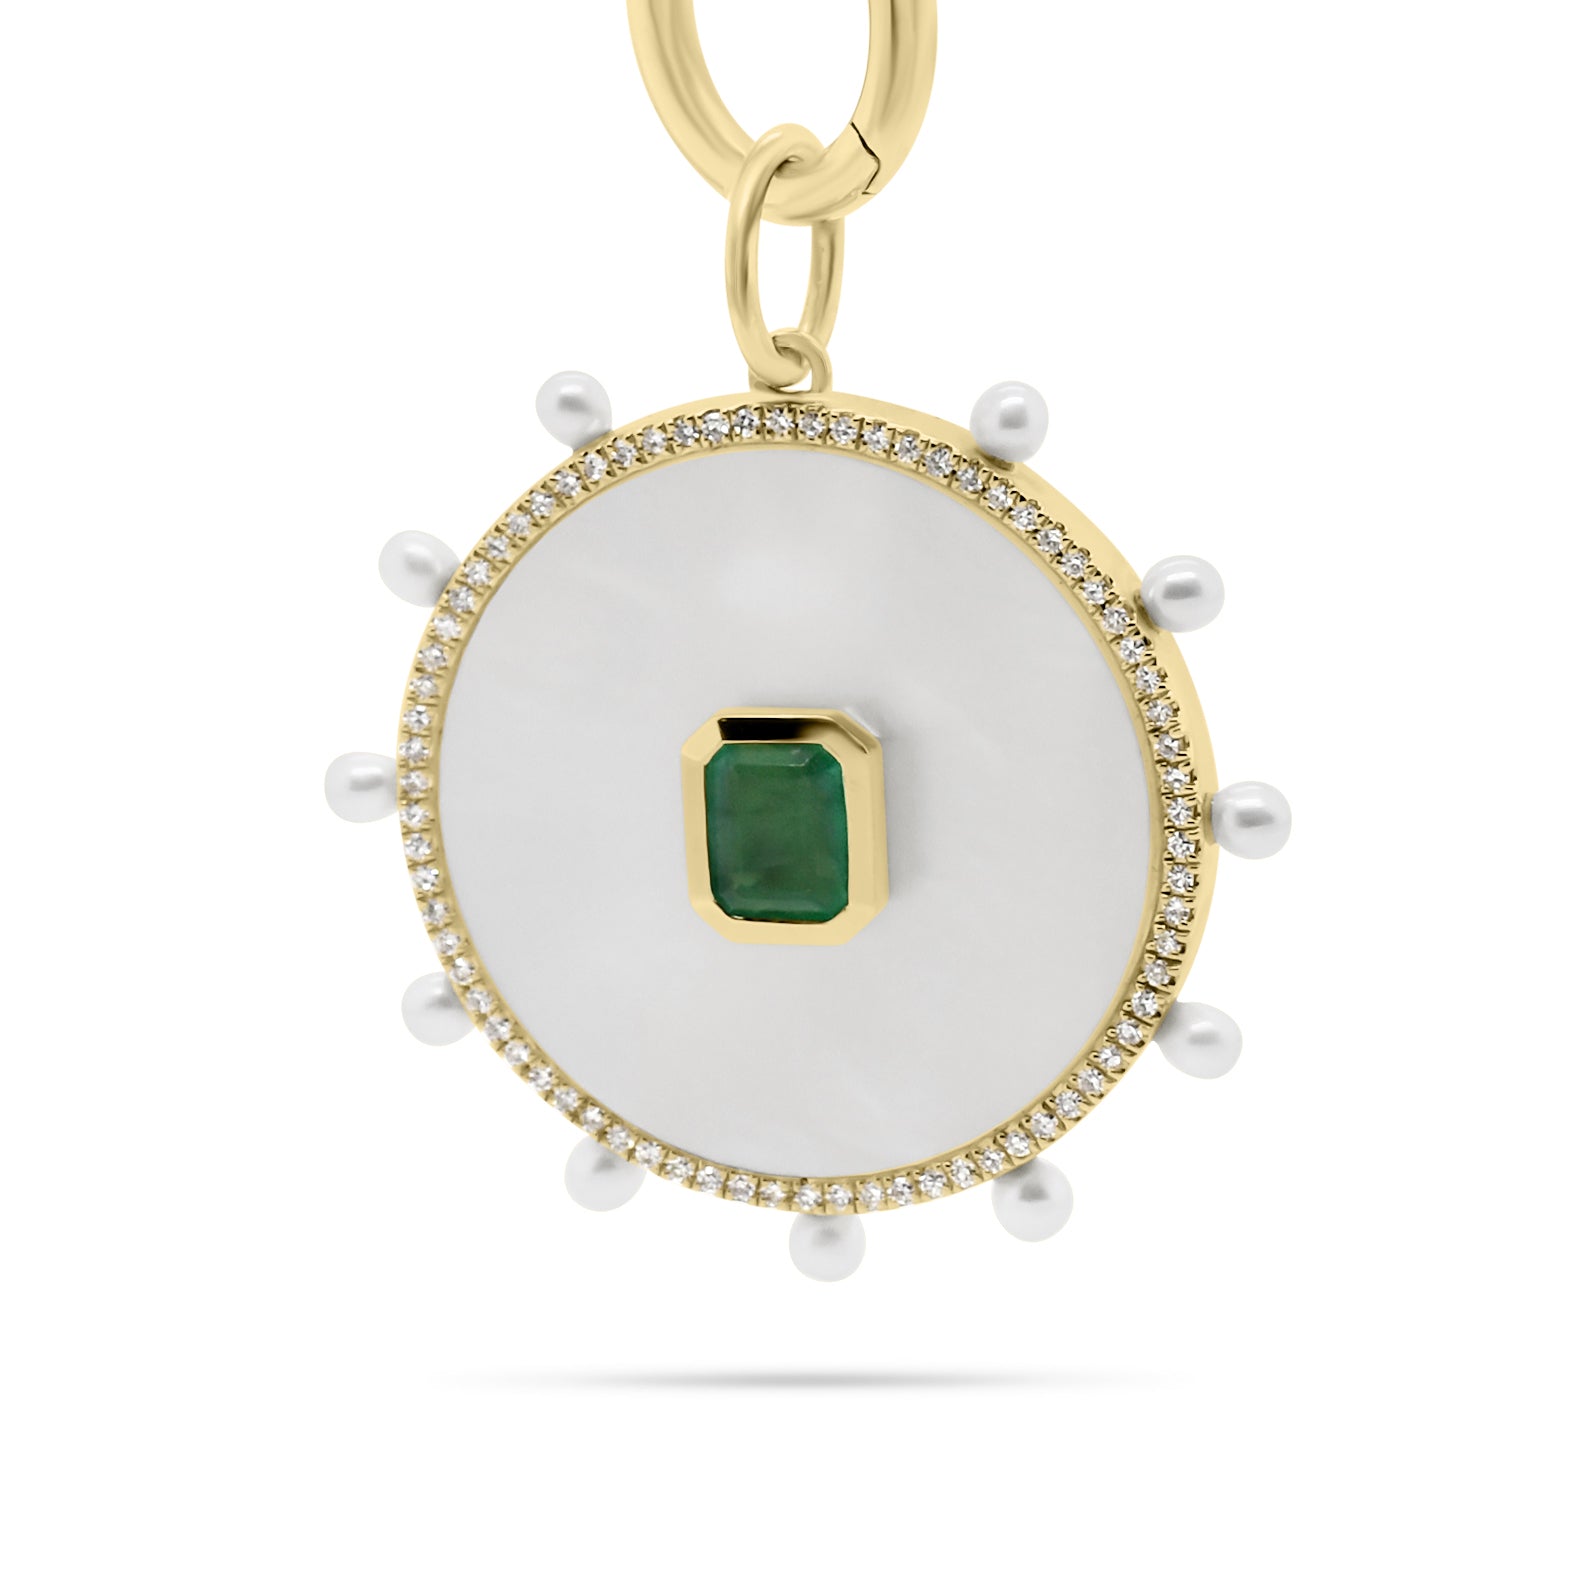 Emerald & Mother of Pearl Charm - 14K yellow gold weighing 2.99 grams  - 0.49 ct emerald  - 74 round diamonds totaling 0.15 carats